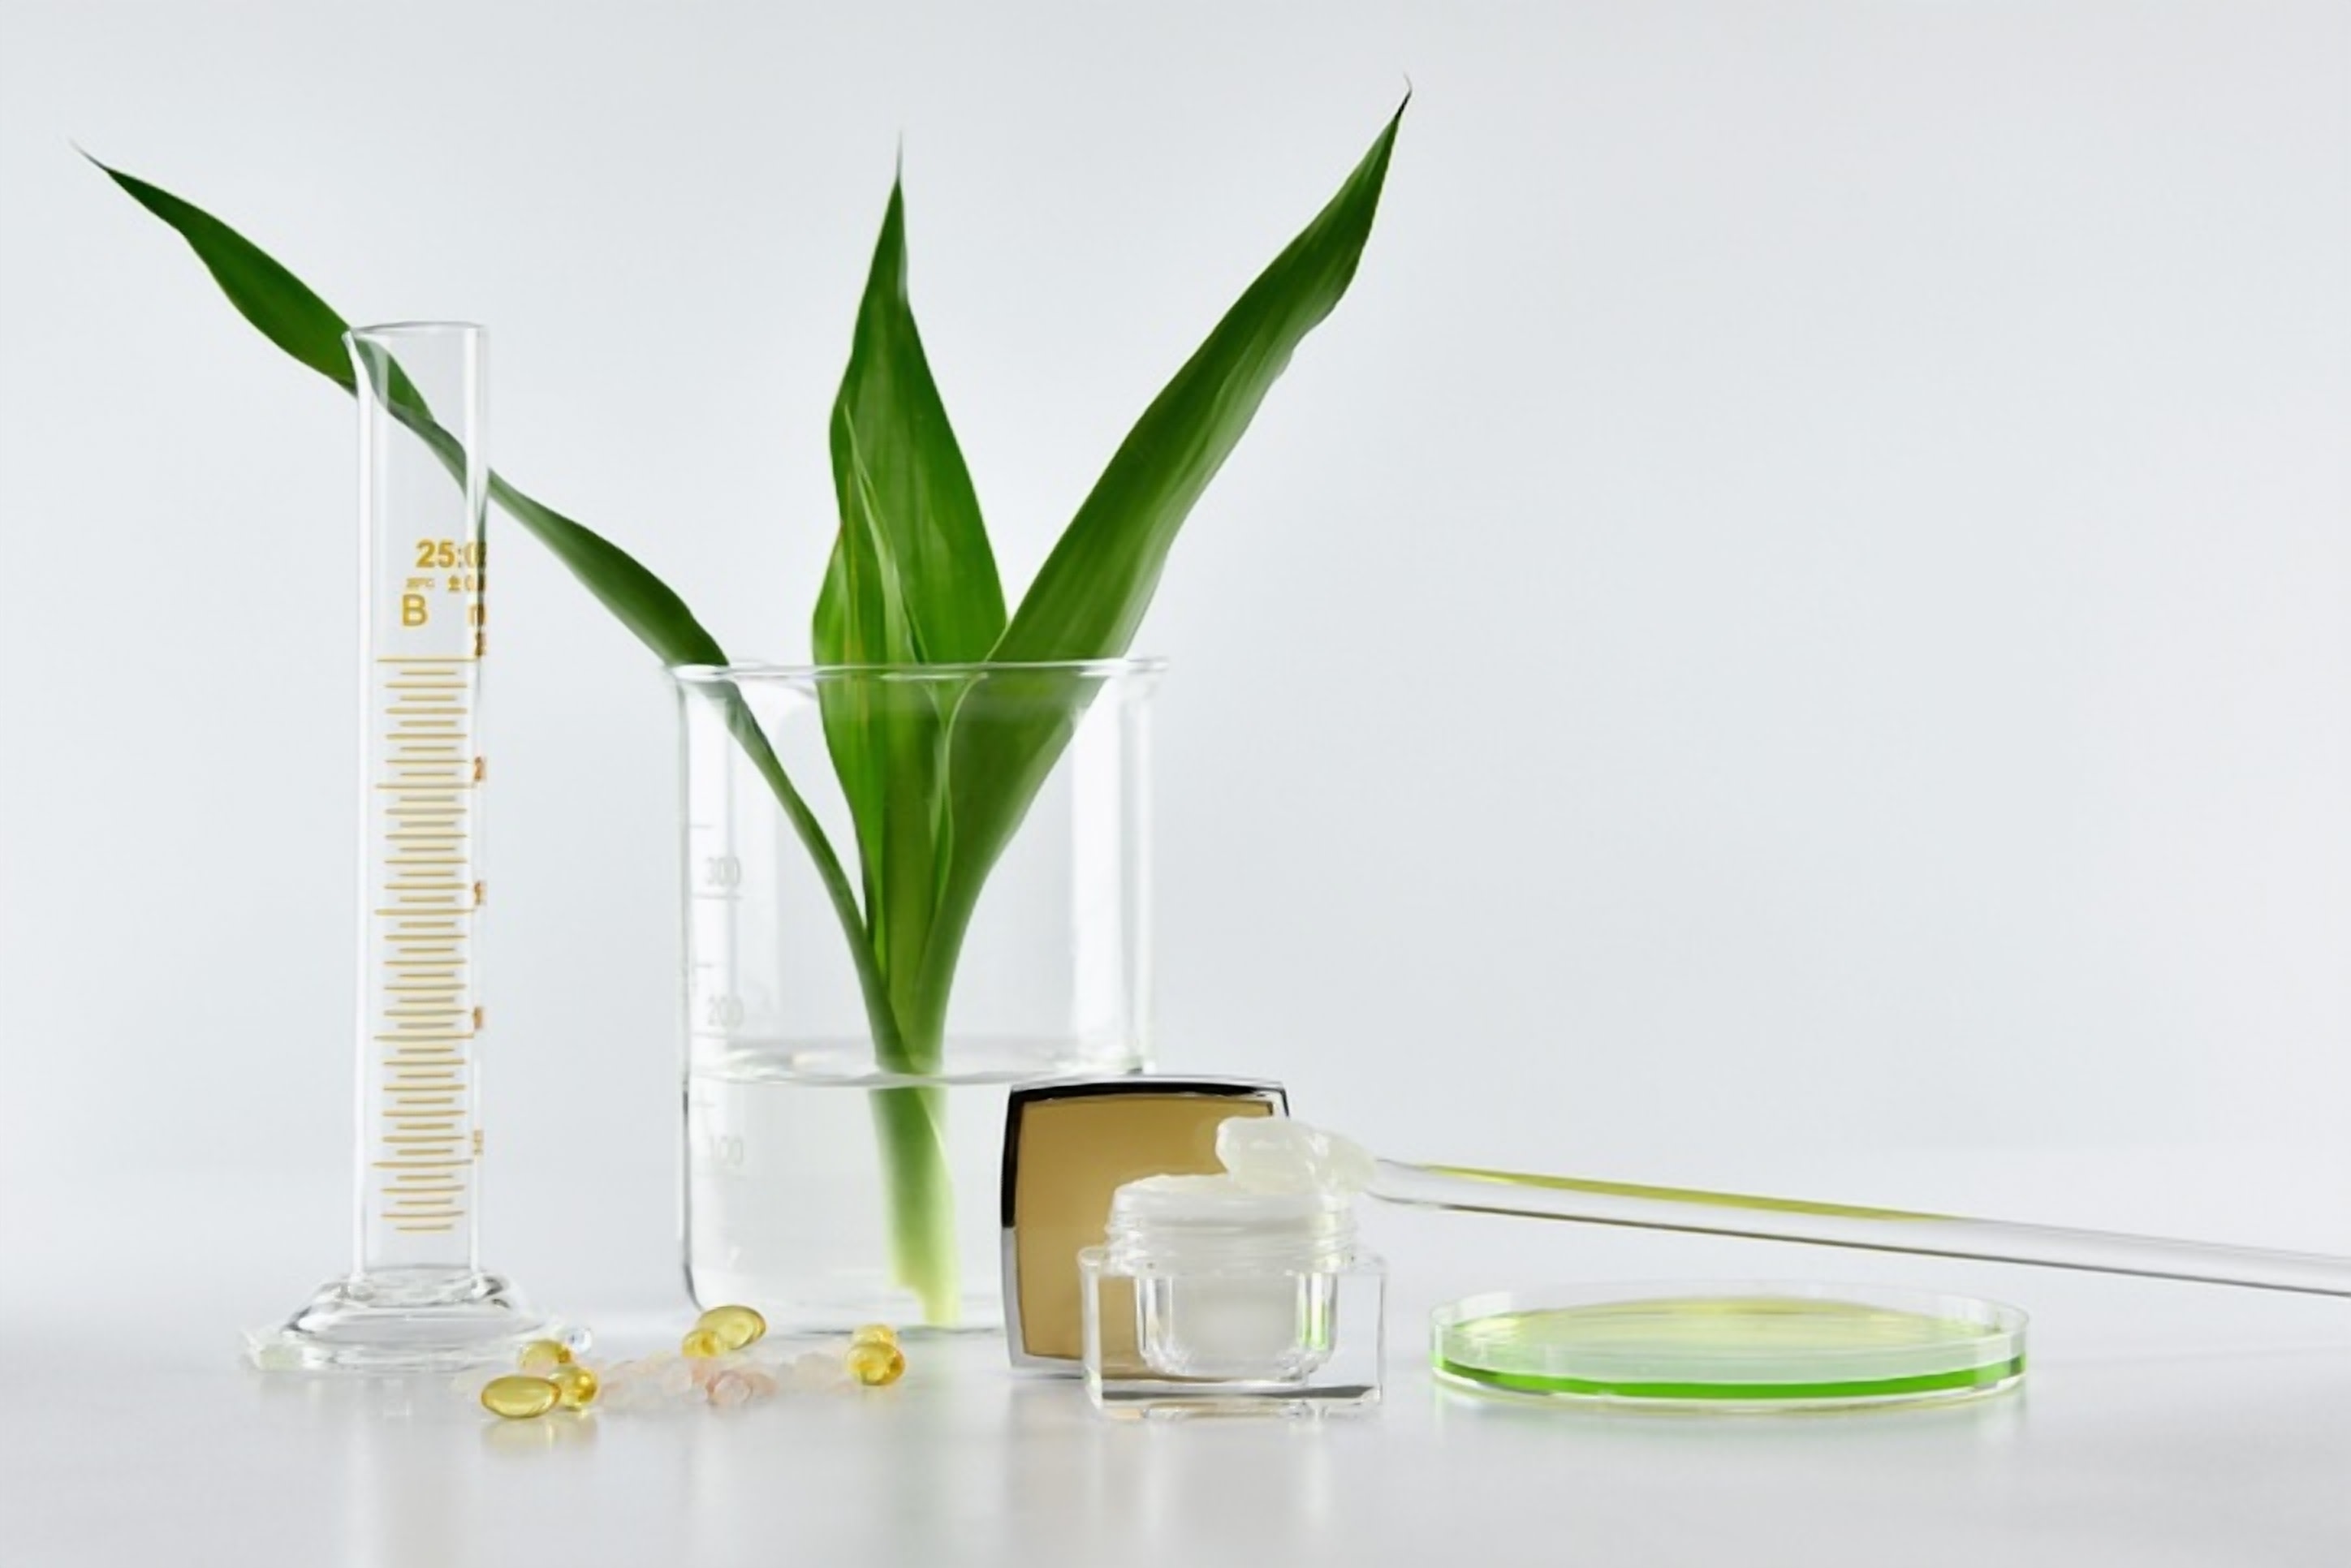 L'Oreal Invests in Sustainably Sourced Ingredients